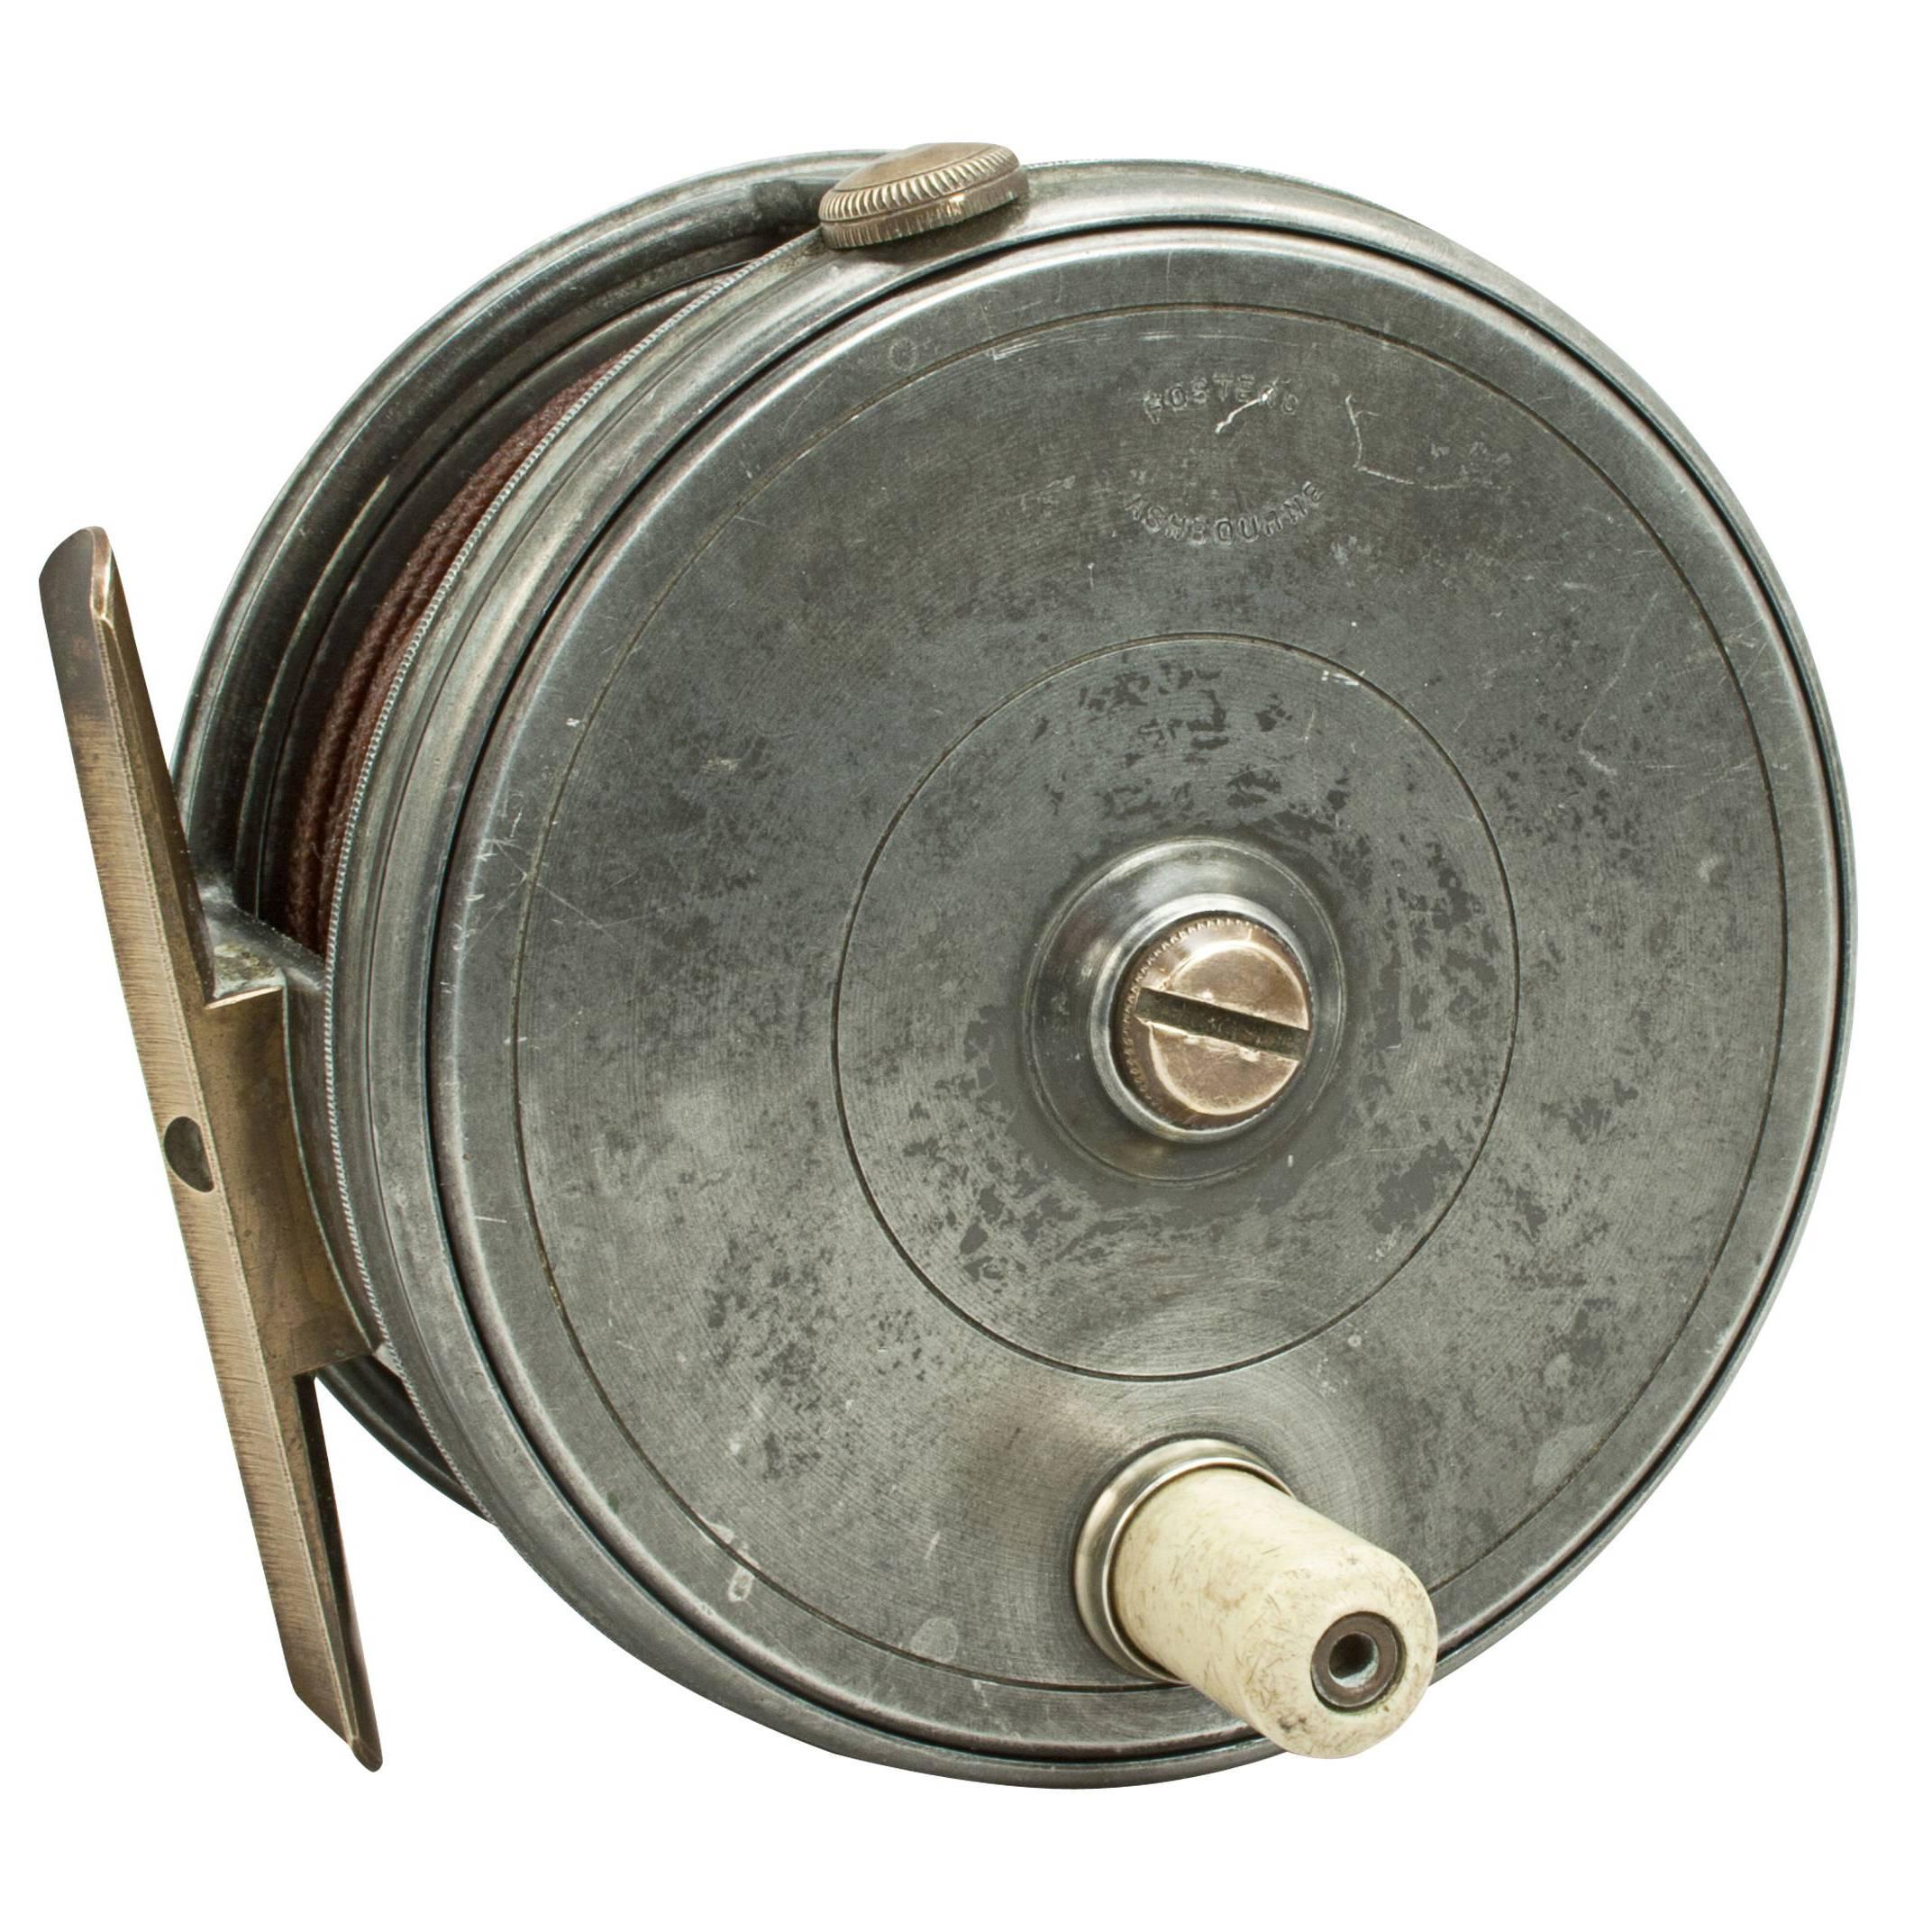 Salmon Fishing Reel by Foster